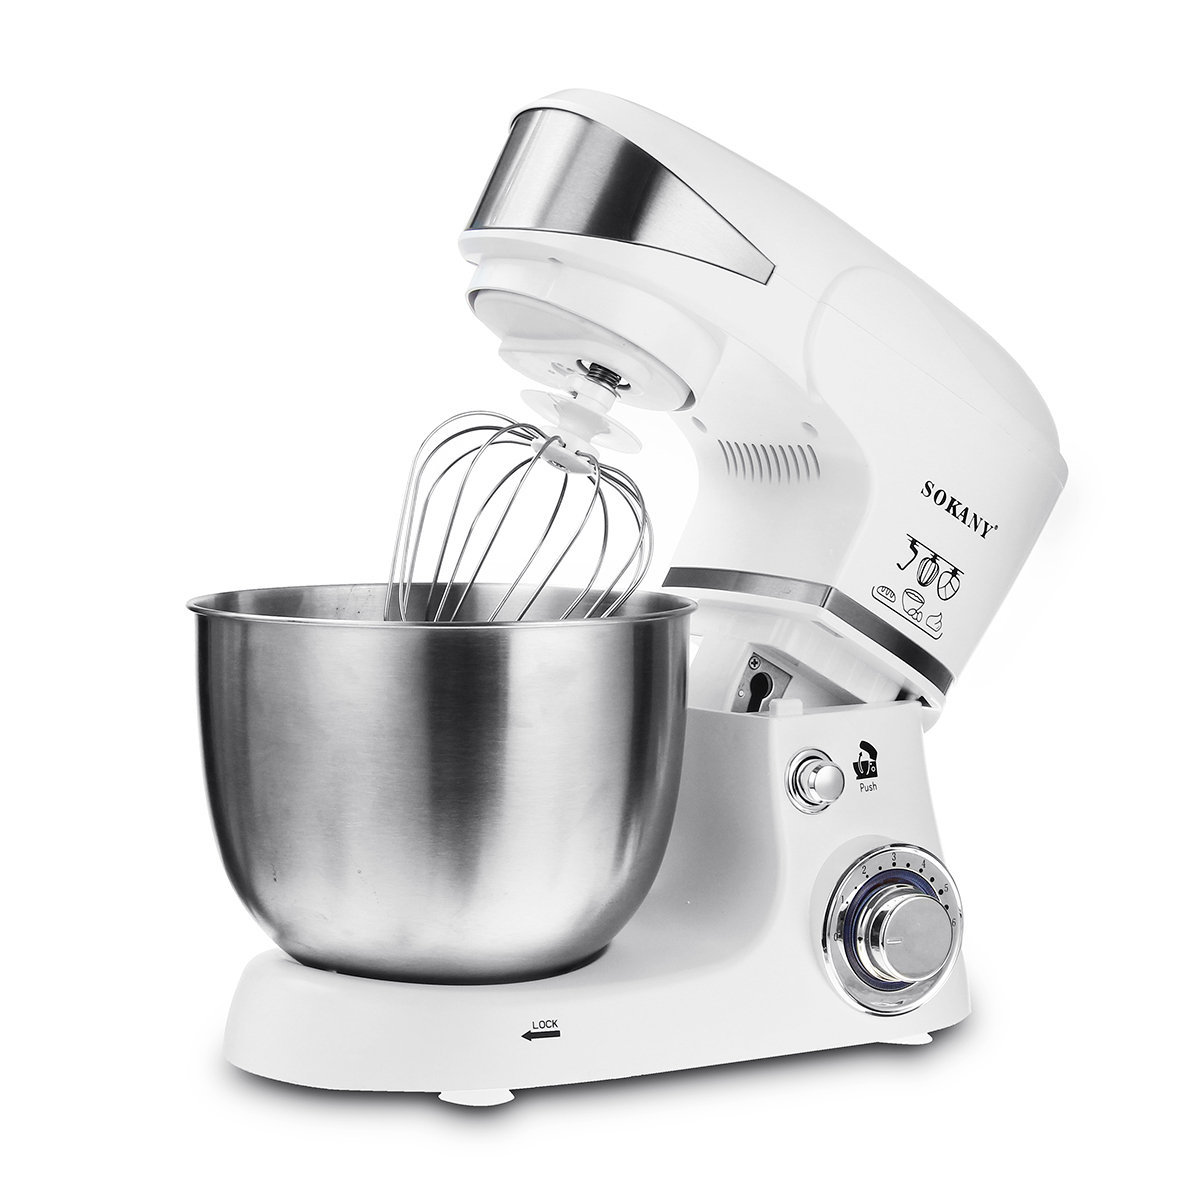 Sokany-220-240V-1000W-5L-Electric-Food-Stand-Mixer-Dough-Hook-Whip-Beater-Whisk-1518605